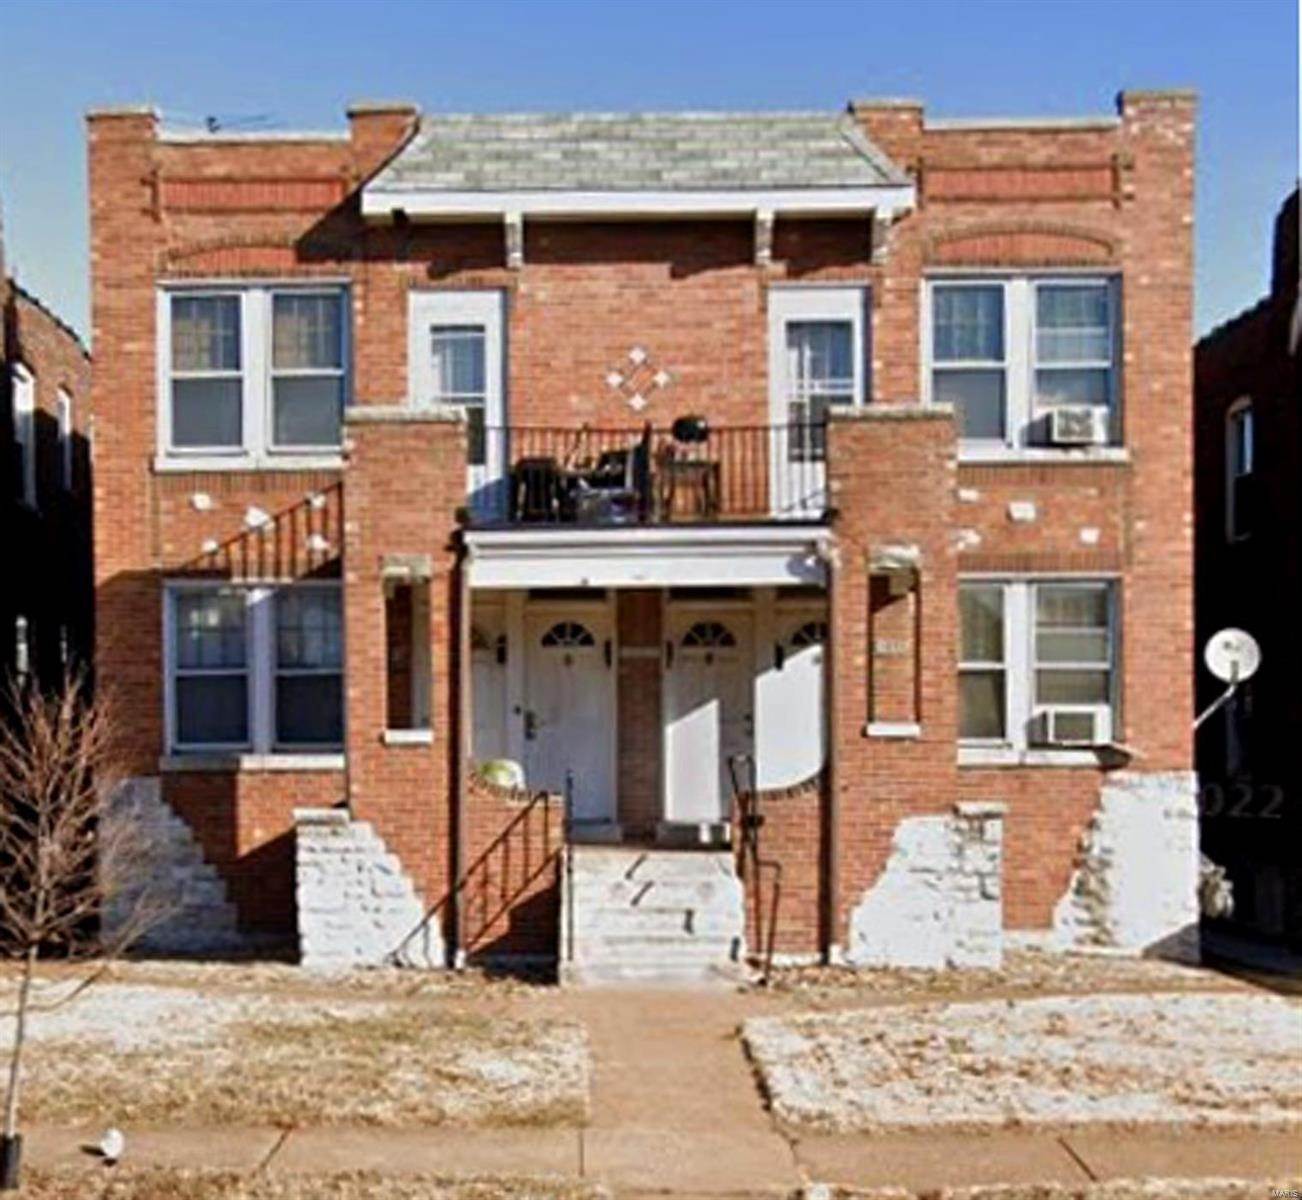 Property for Sale at 5051 Chippewa Street St. Louis, Missouri 63109 United States